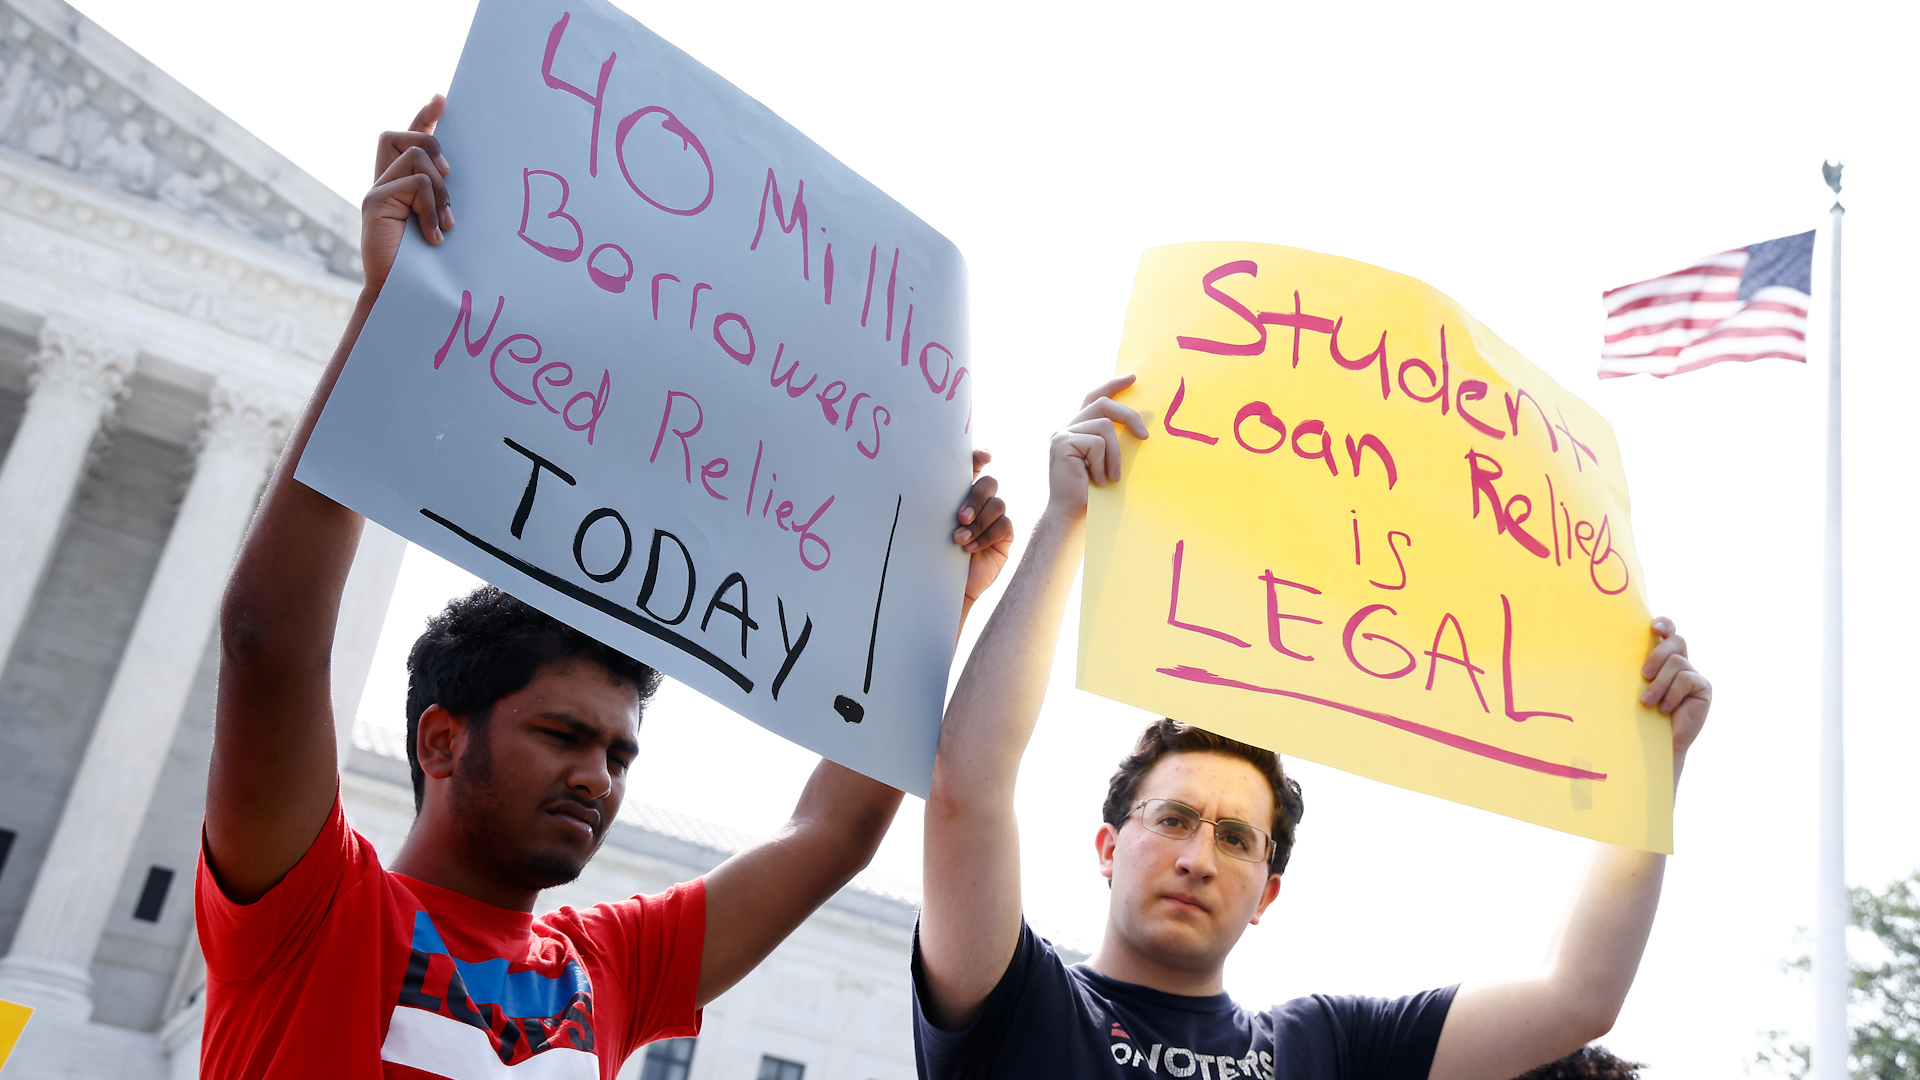 3 things to know now that Supreme Court blocked Biden #39 s student loan